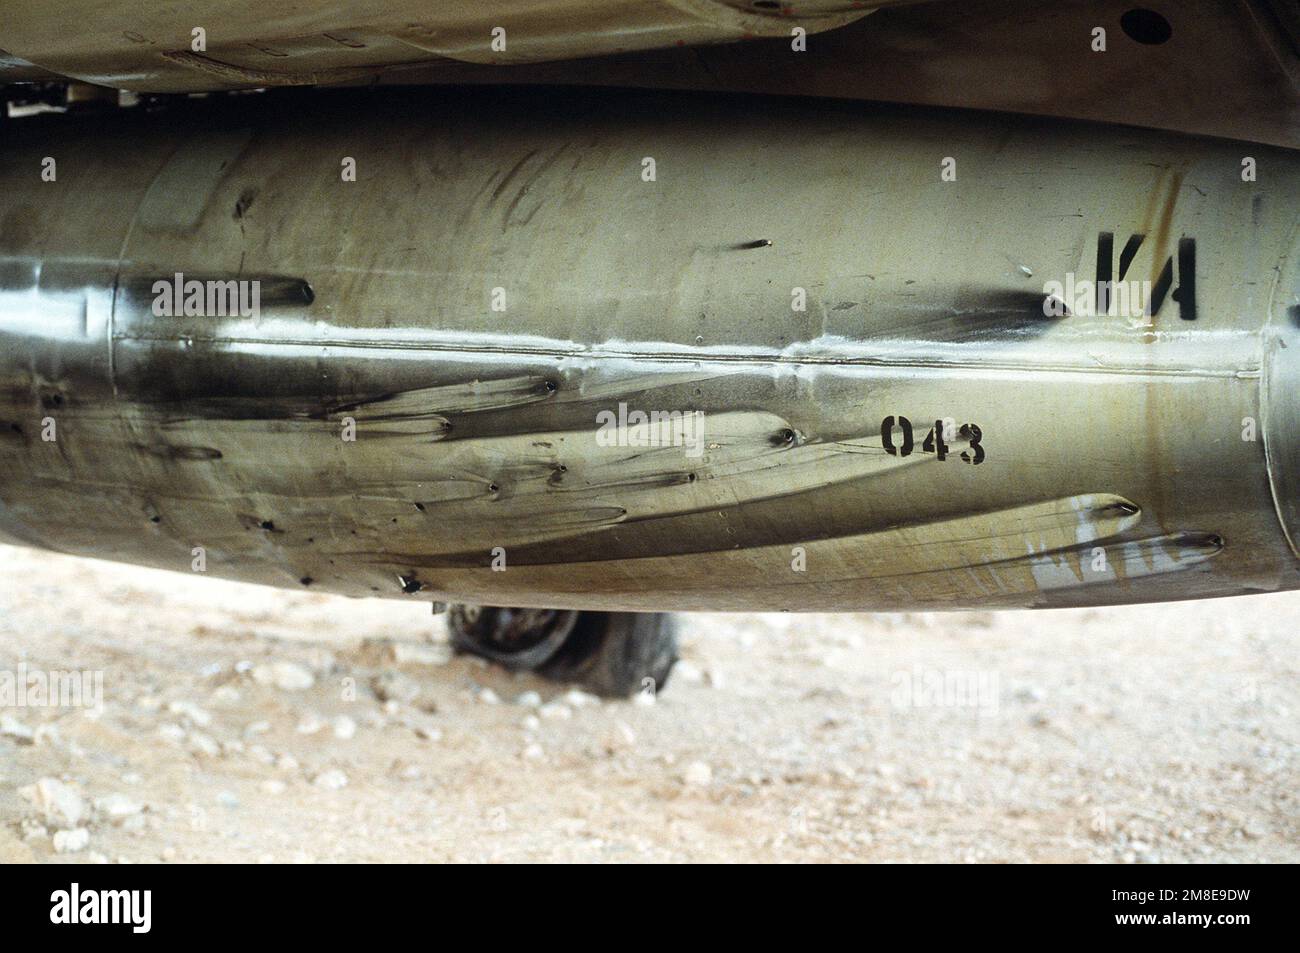 A fuel tank of an A-6E Intruder attack aircraft from Attack Squadron 35 (VA-35), deployed from the aircraft carrier USS SARATOGA (CV-60), shows battle damage from a mission at the start of Operation Desert Storm.. Subject Operation/Series: DESERT STORM Country: Saudi Arabia(SAU) Stock Photo